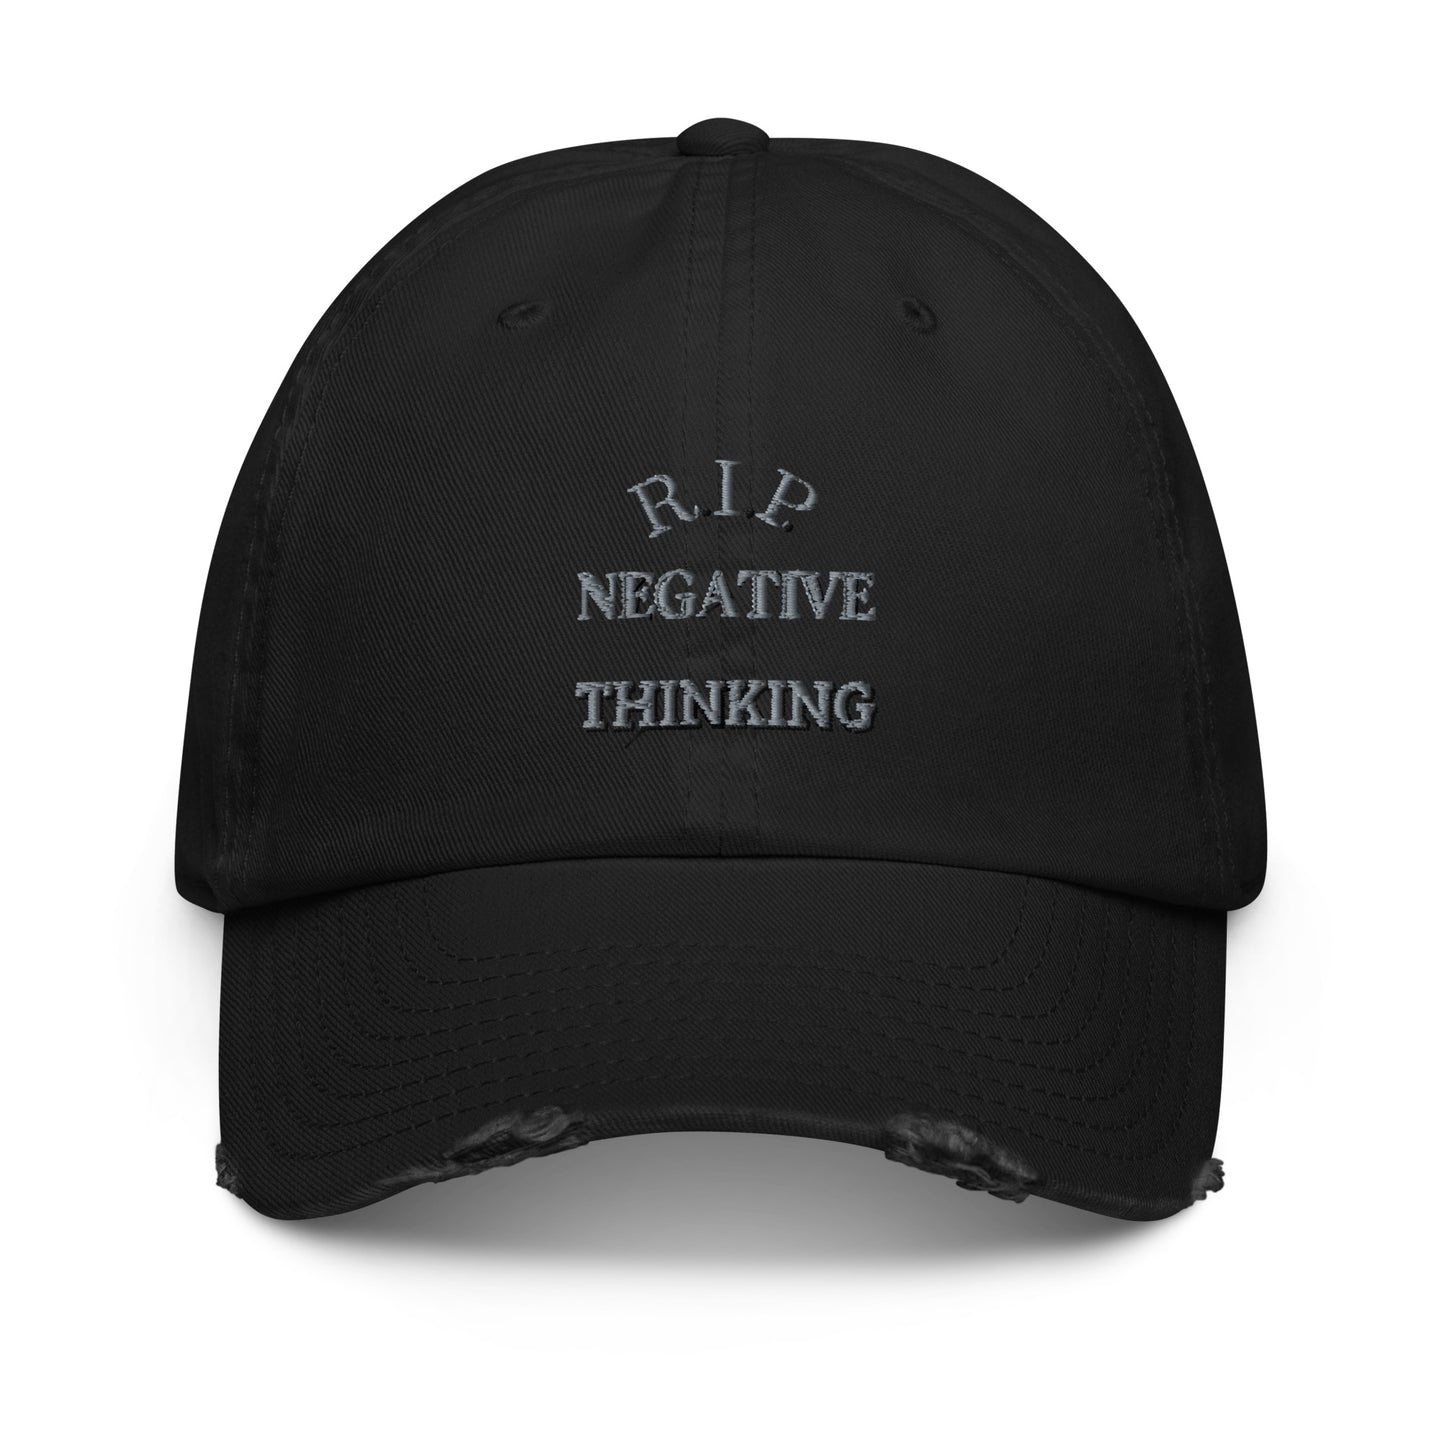 Shop for Hats with Motivational Messages to Inspire Positive Thinking and Self Belief. Our FLI PÊP! store features Organic Eco-Friendly hats and caps to inspire you to be your best self. Our Hats are made to fit just right and eliminate negative thinking.